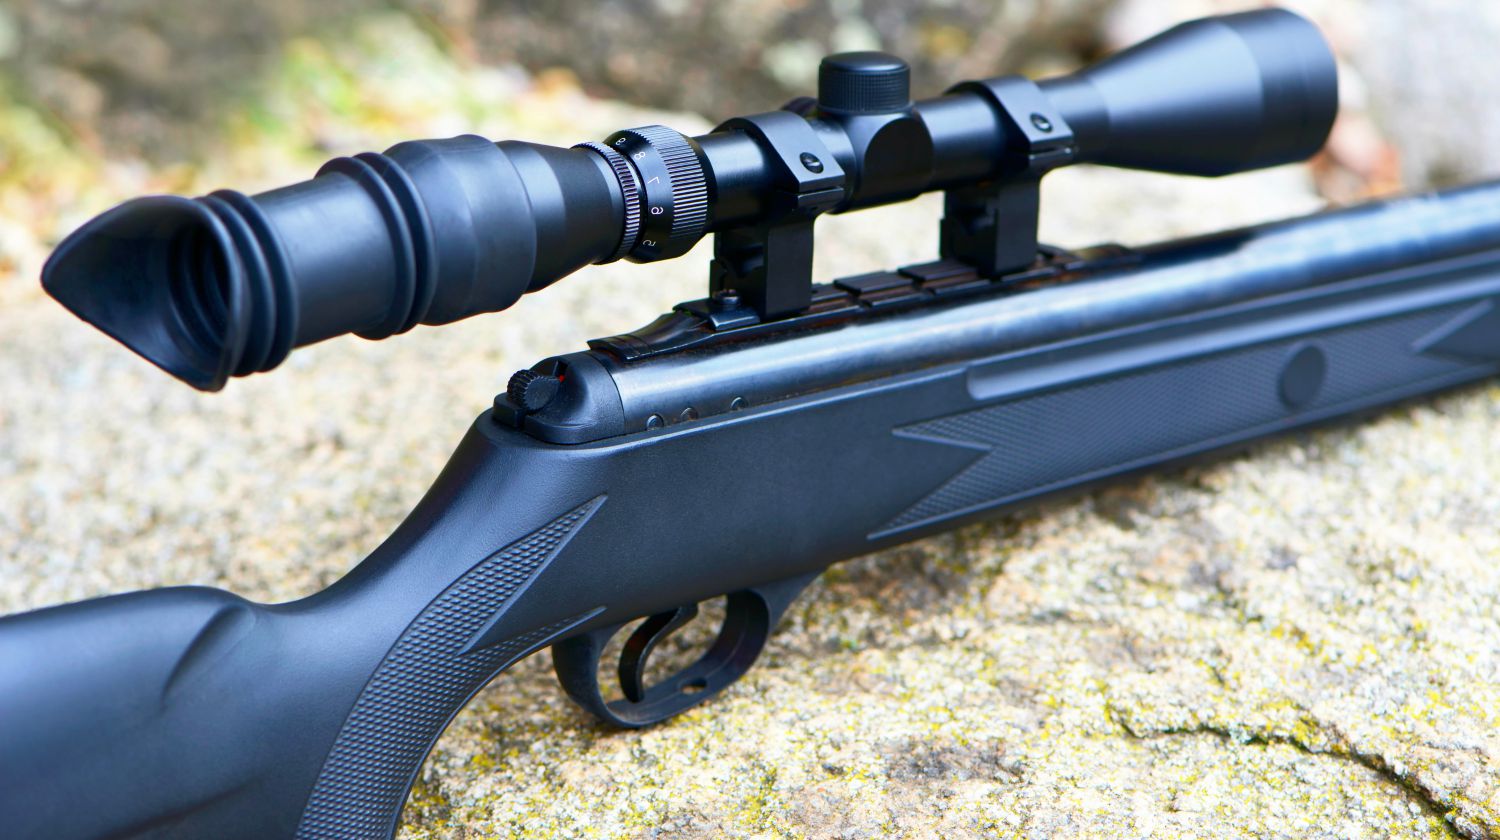 Feature | Pneumatic air rifle with optical sight | Air Guns: Are They The Best Survival Weapons?